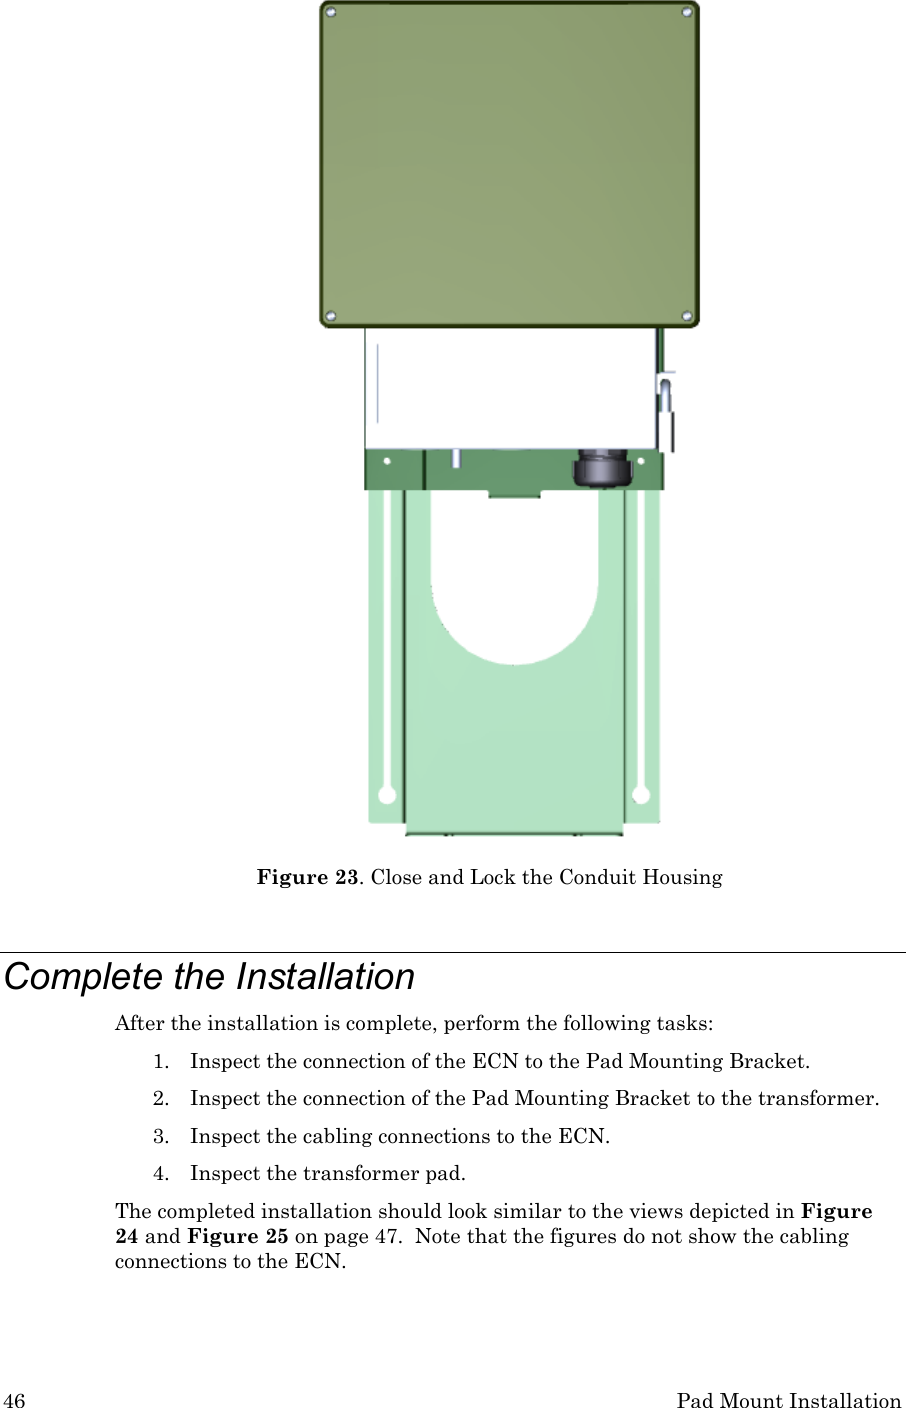 46 Pad Mount Installation  Figure 23. Close and Lock the Conduit Housing  Complete the Installation After the installation is complete, perform the following tasks: 1. Inspect the connection of the ECN to the Pad Mounting Bracket. 2. Inspect the connection of the Pad Mounting Bracket to the transformer. 3. Inspect the cabling connections to the ECN. 4. Inspect the transformer pad. The completed installation should look similar to the views depicted in Figure 24 and Figure 25 on page 47.  Note that the figures do not show the cabling connections to the ECN. 